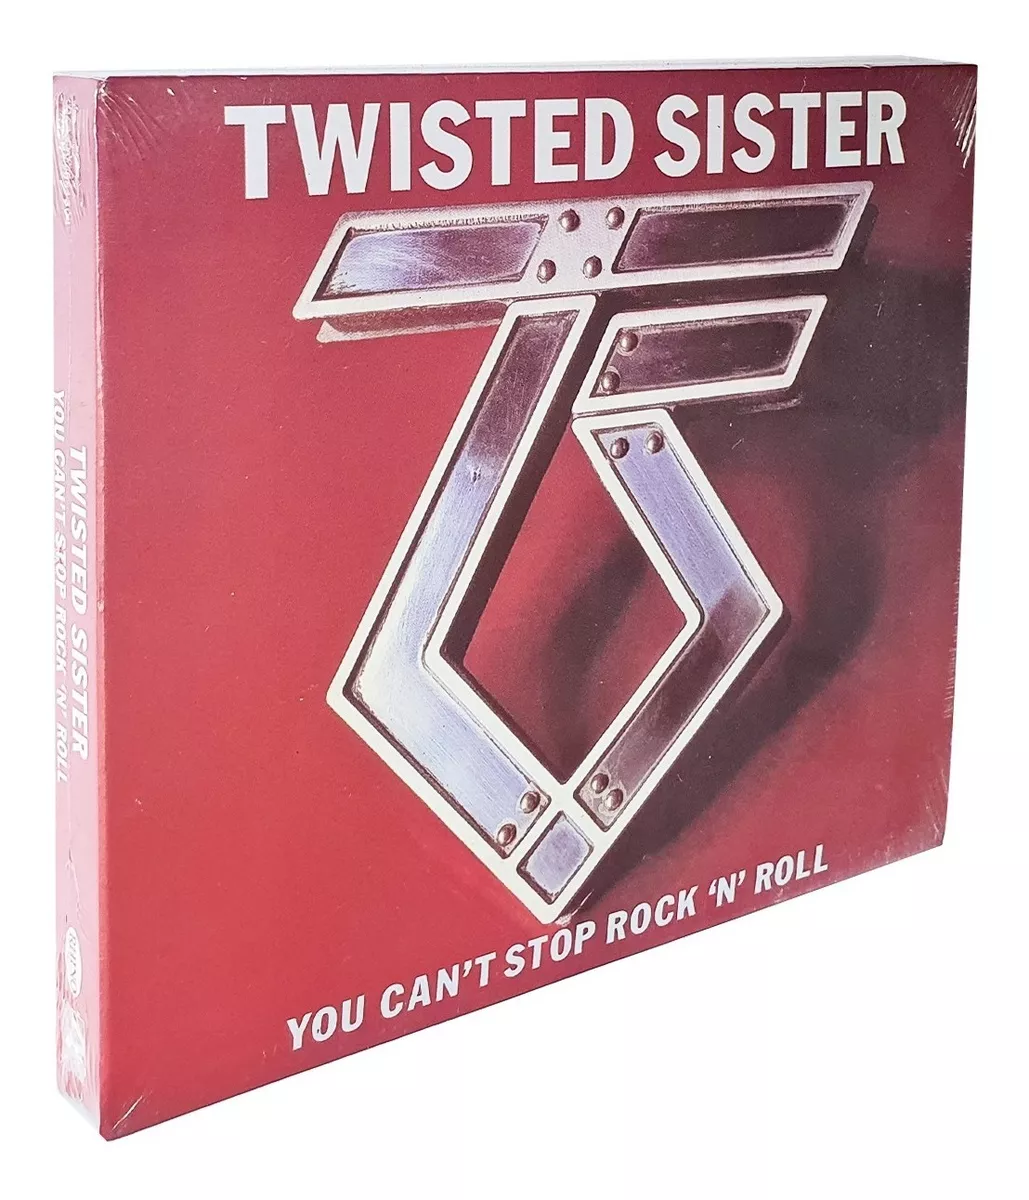 Cd Twisted Sister You Cant Stop Rock N Roll Duplo Original